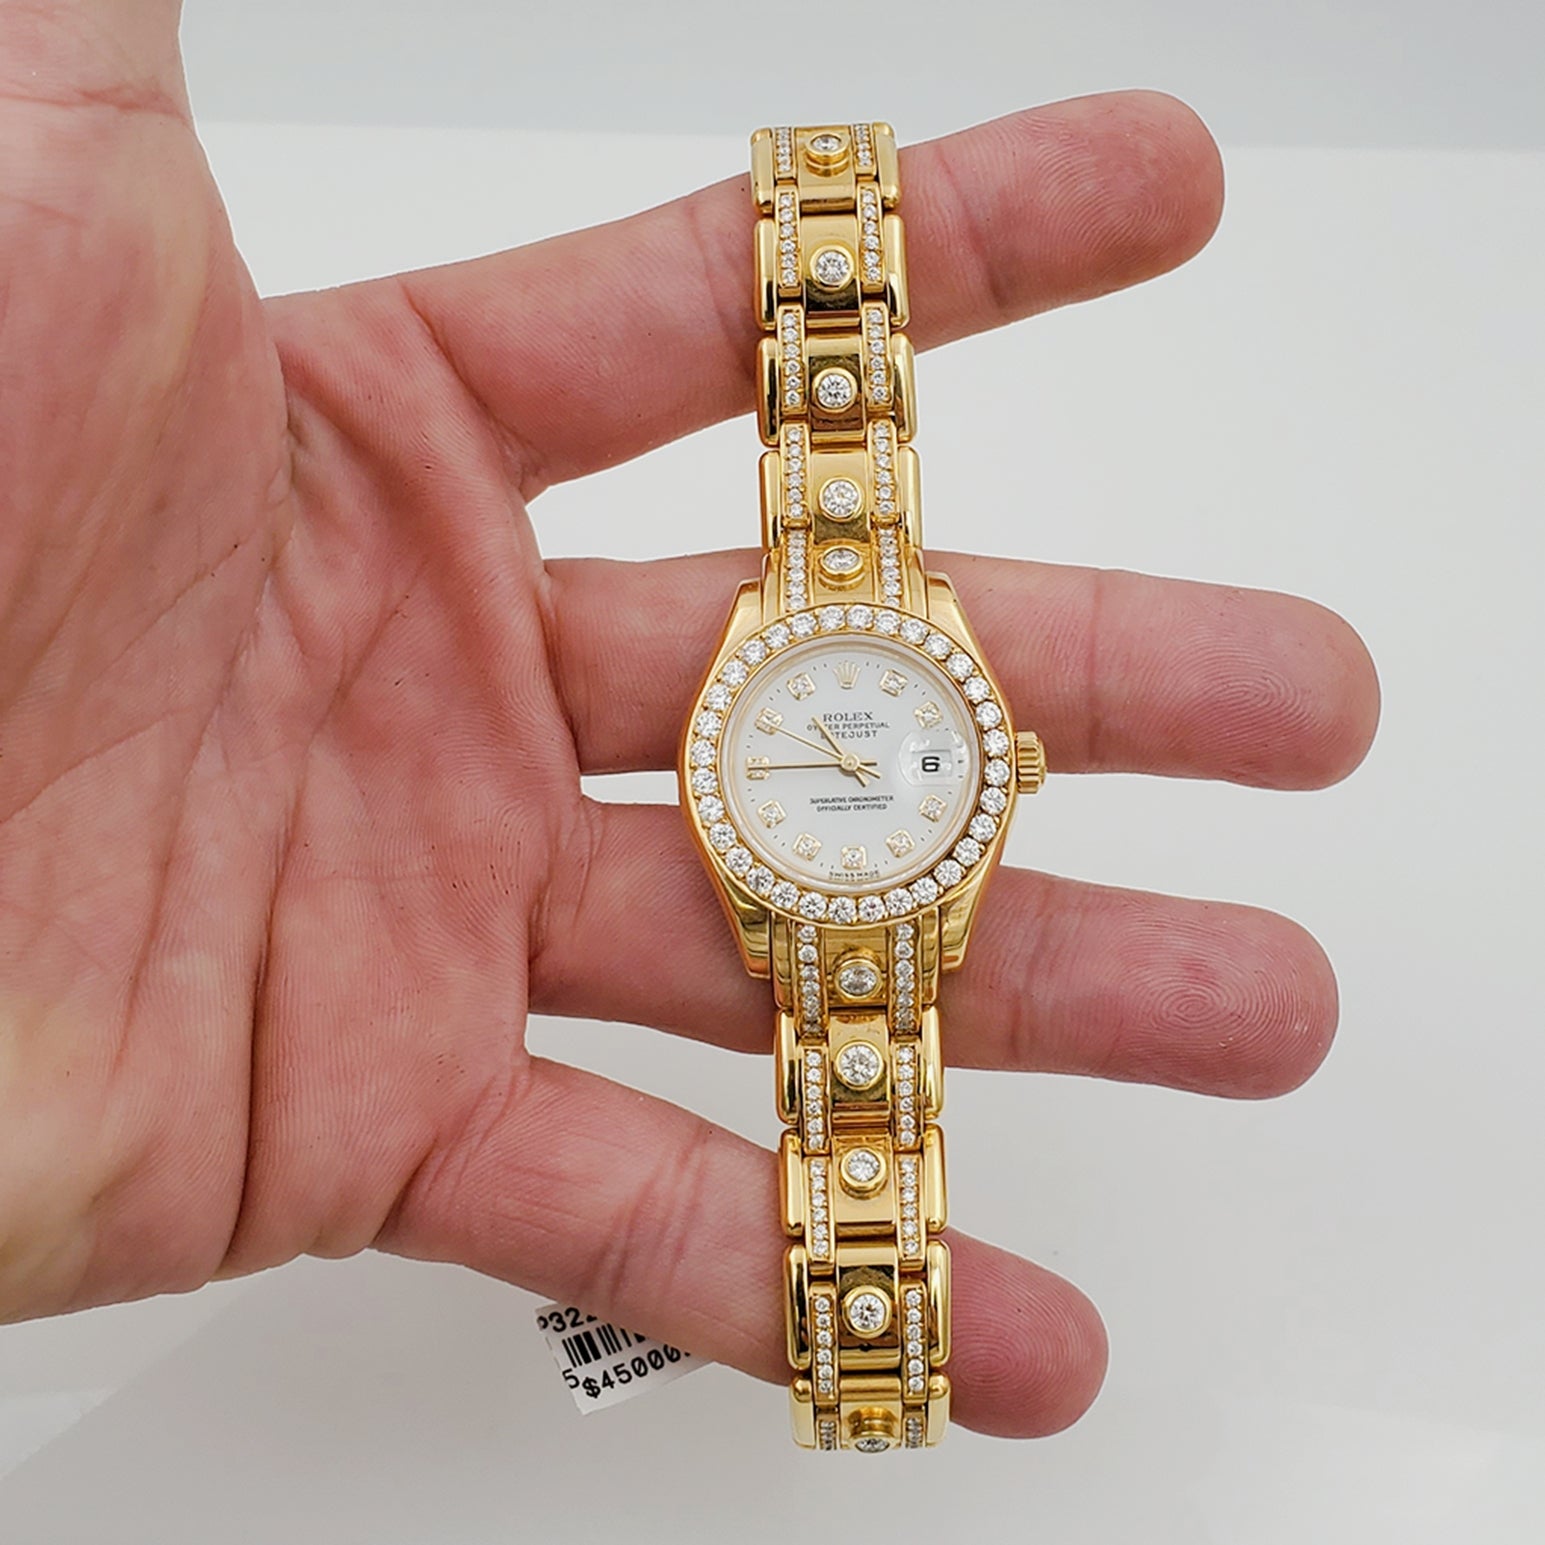 Ladies Rolex 29mm Pearlmaster 18k Yellow Gold Rolex Watch with White Diamond Dial, Diamond Bezel and Diamond Band. (Pre-Owned)